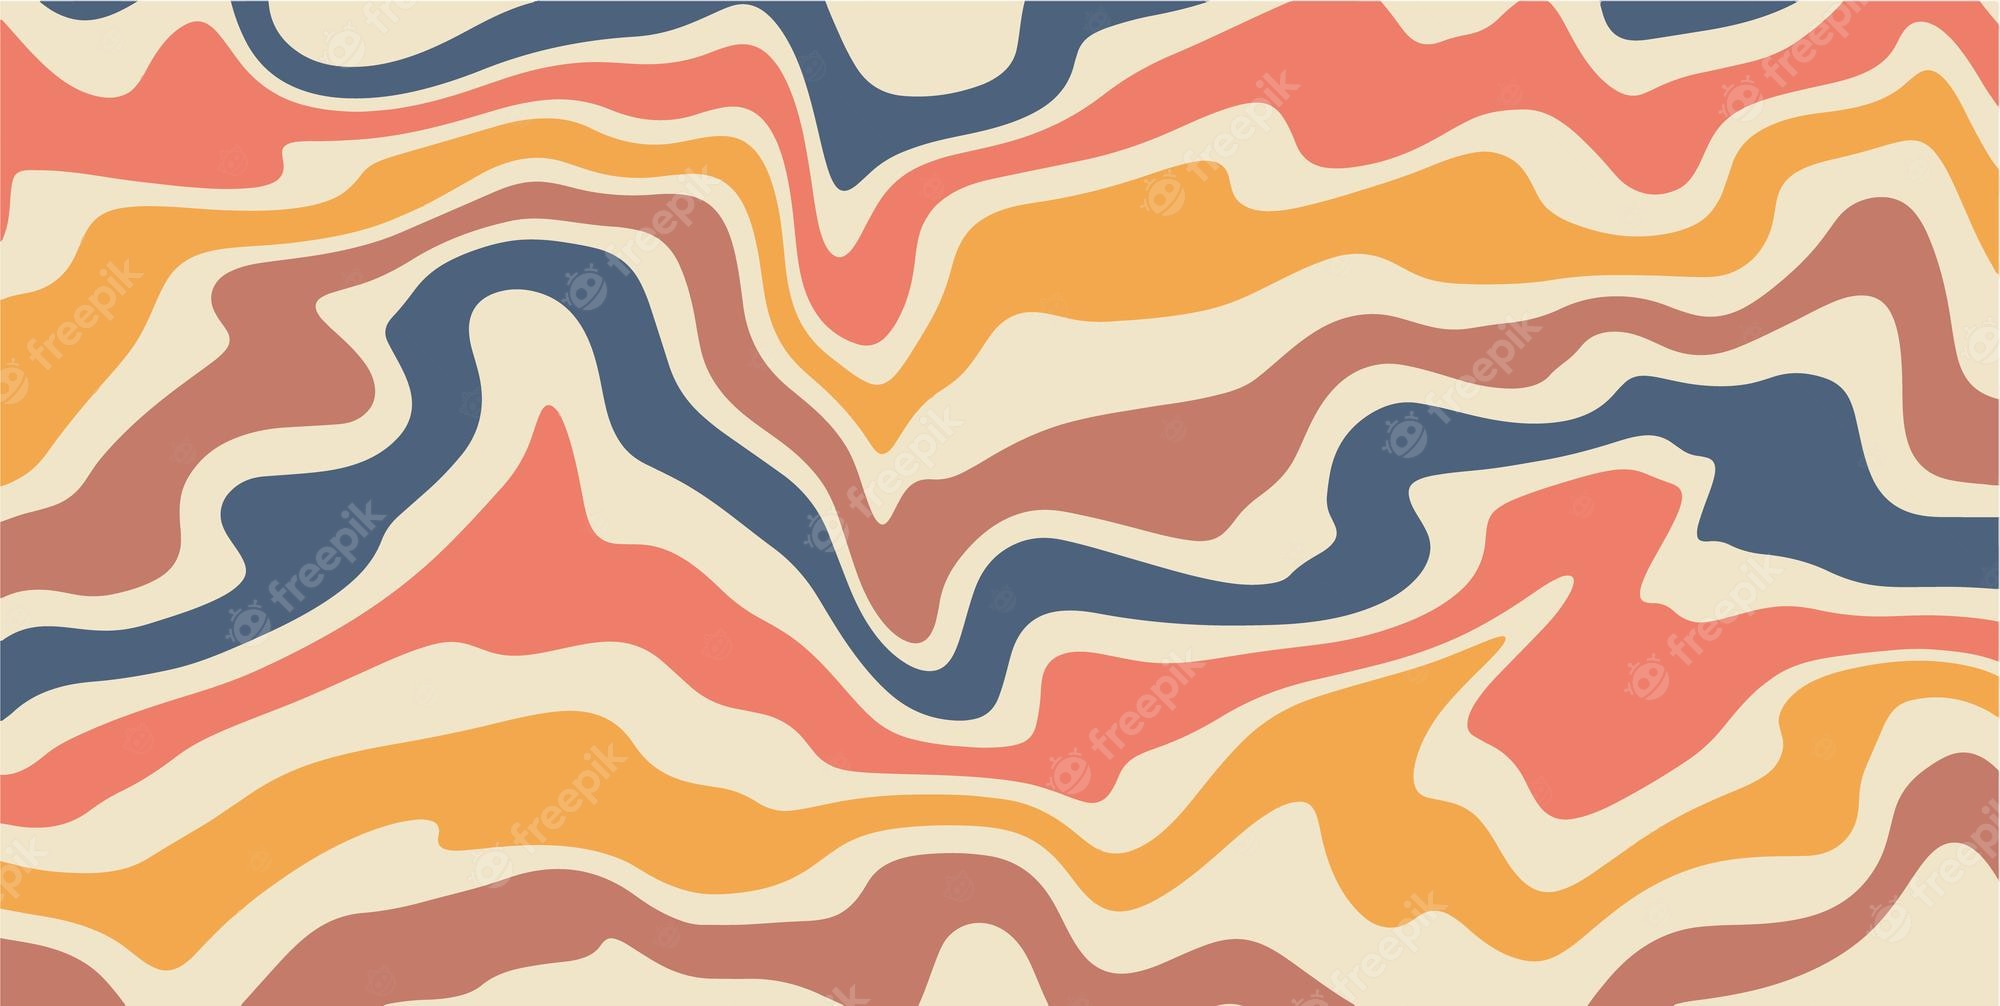 A vector image of a colorful abstract pattern - 60s